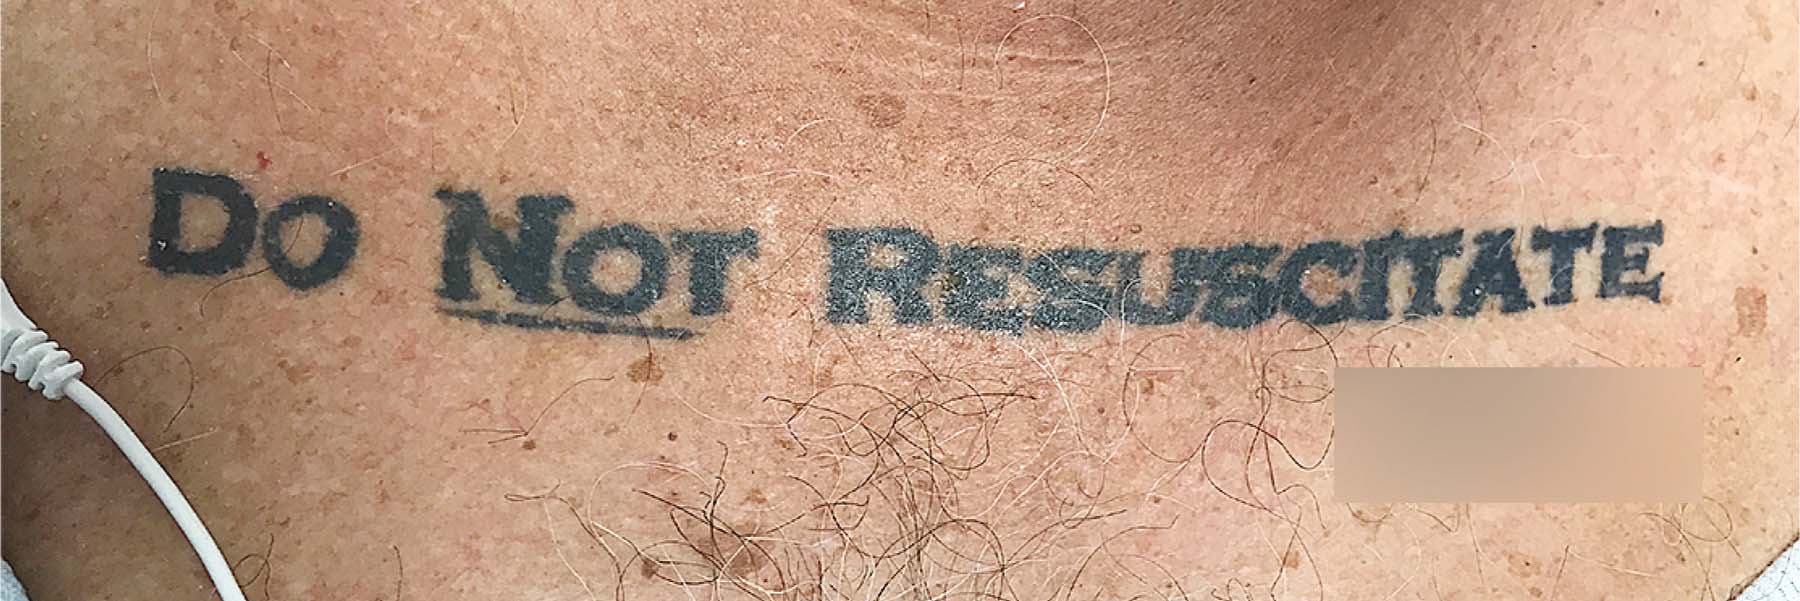 Photo of a tattoo that reads "DO NOT RESUSCITATE" on the hairy chest of a patient